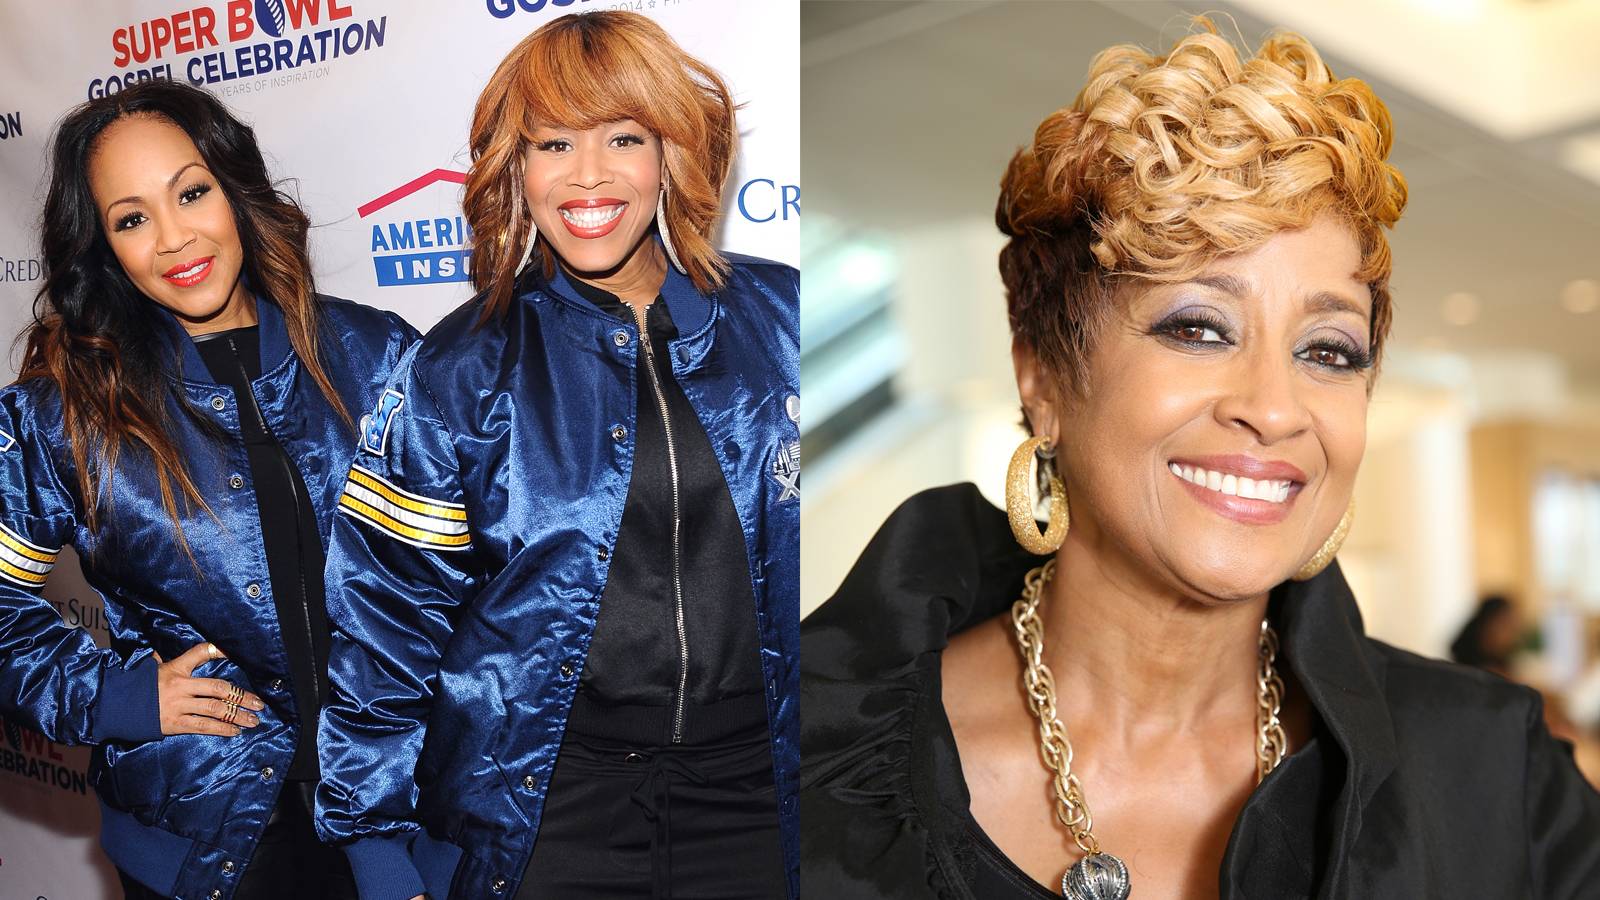 Bobby Jones Gospel Welcomes Mary Mary, Dorinda Clark-Cole and Tina Campbell - Lovely ladies of gospel Mary Mary and Dorinda Clark-Cole take the stage. (Photos from left: Gary Gershoff/Getty Images for Super Bowl, Monica Morgan/WireImage)